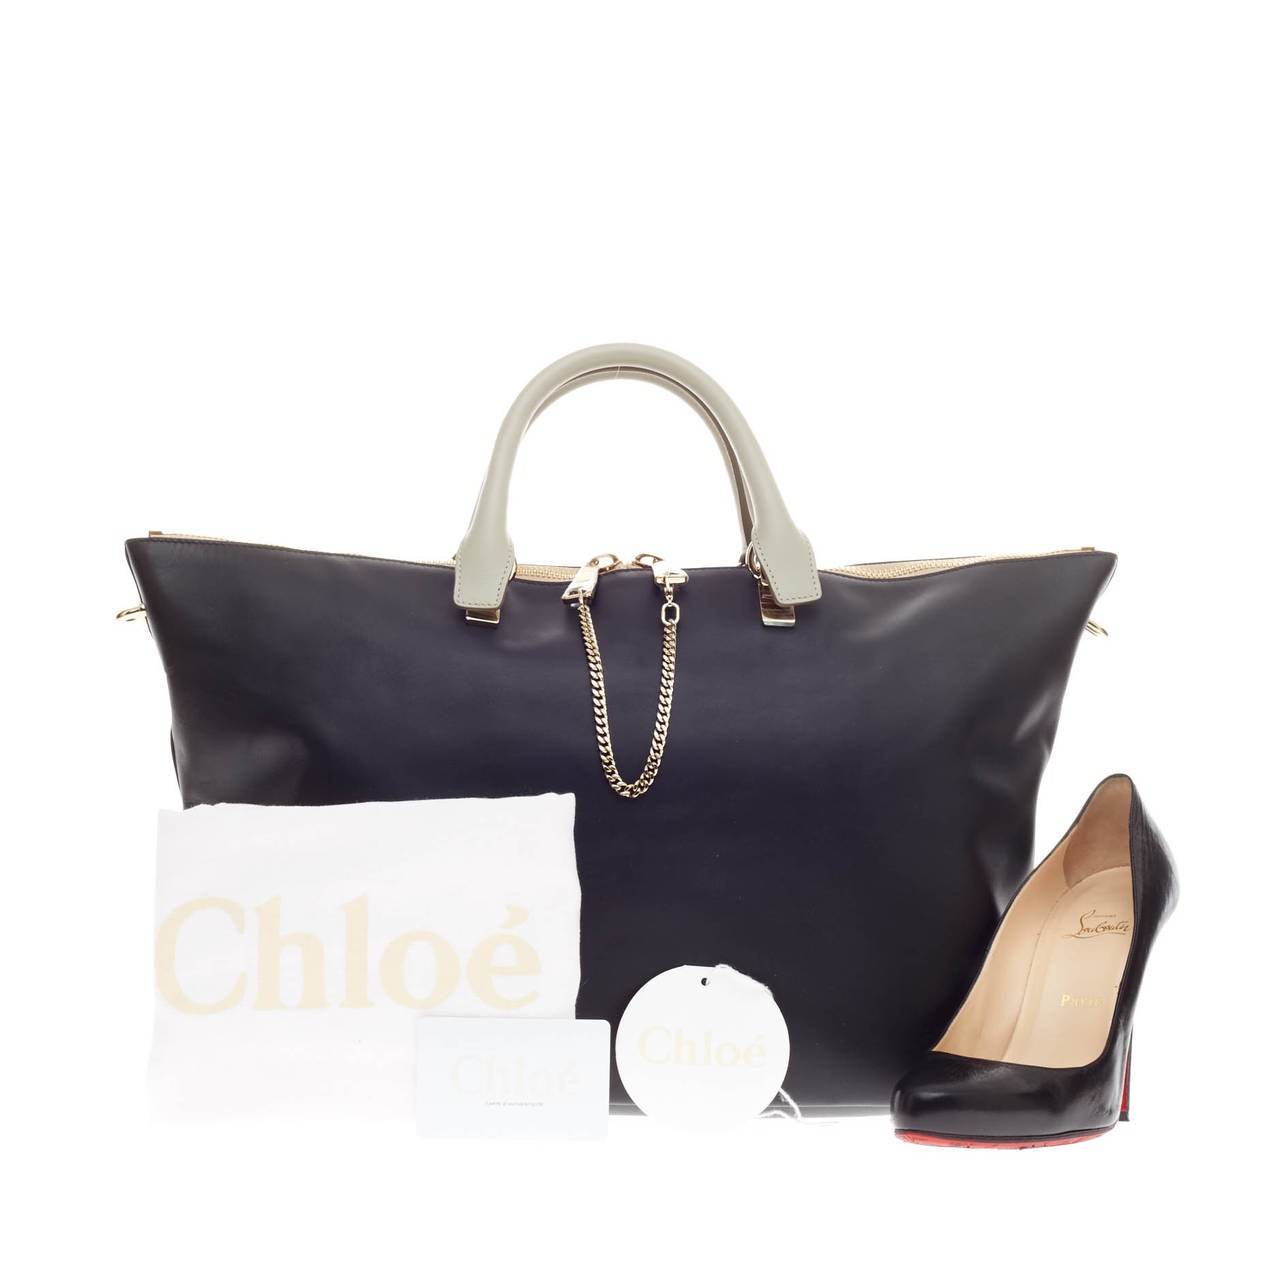 This authentic Chloe Baylee Tote Leather Large showcases Chloe's signature balance of casual elegant style. Constructed in smooth black leather, this minimalist tote is the perfect day-to-day companion. It features two rolled gray leather carry